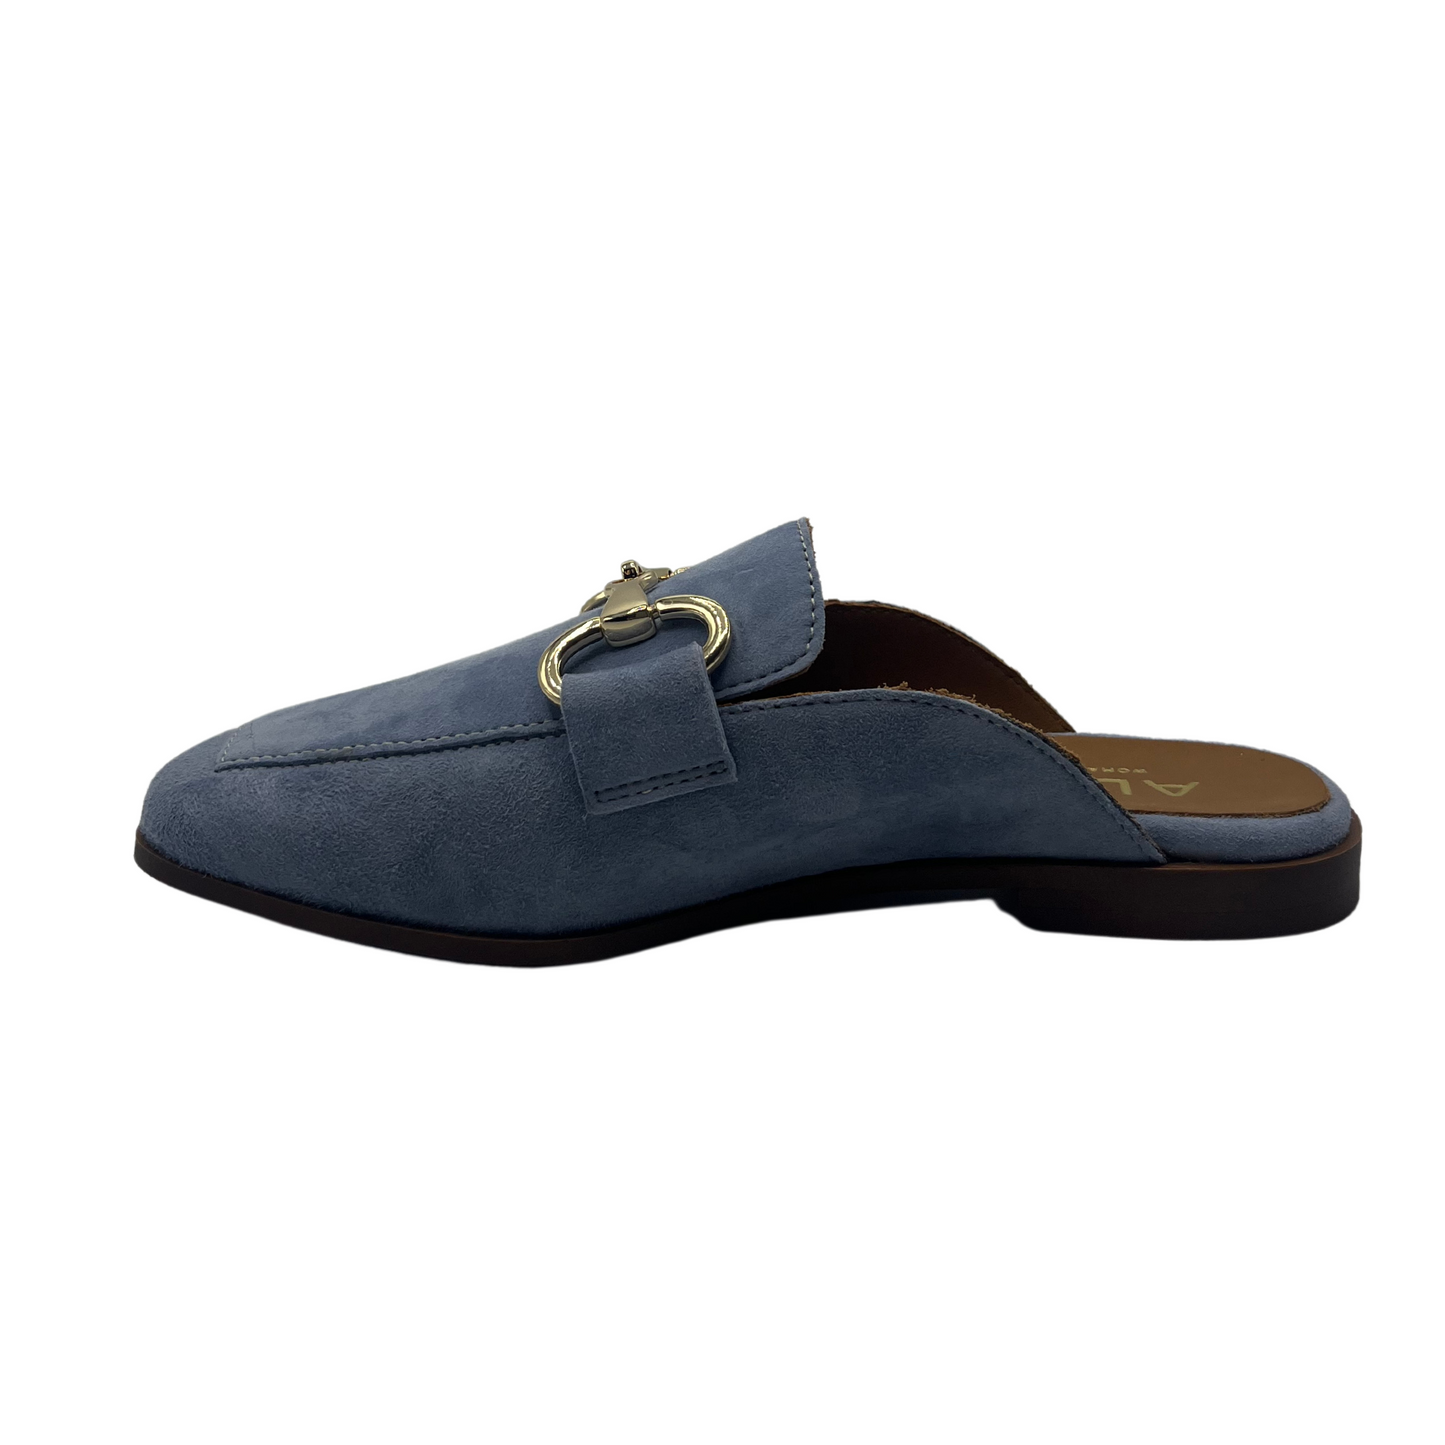 Left facing view of blue leather slip on loafer with low heel and gold bit detail on upper